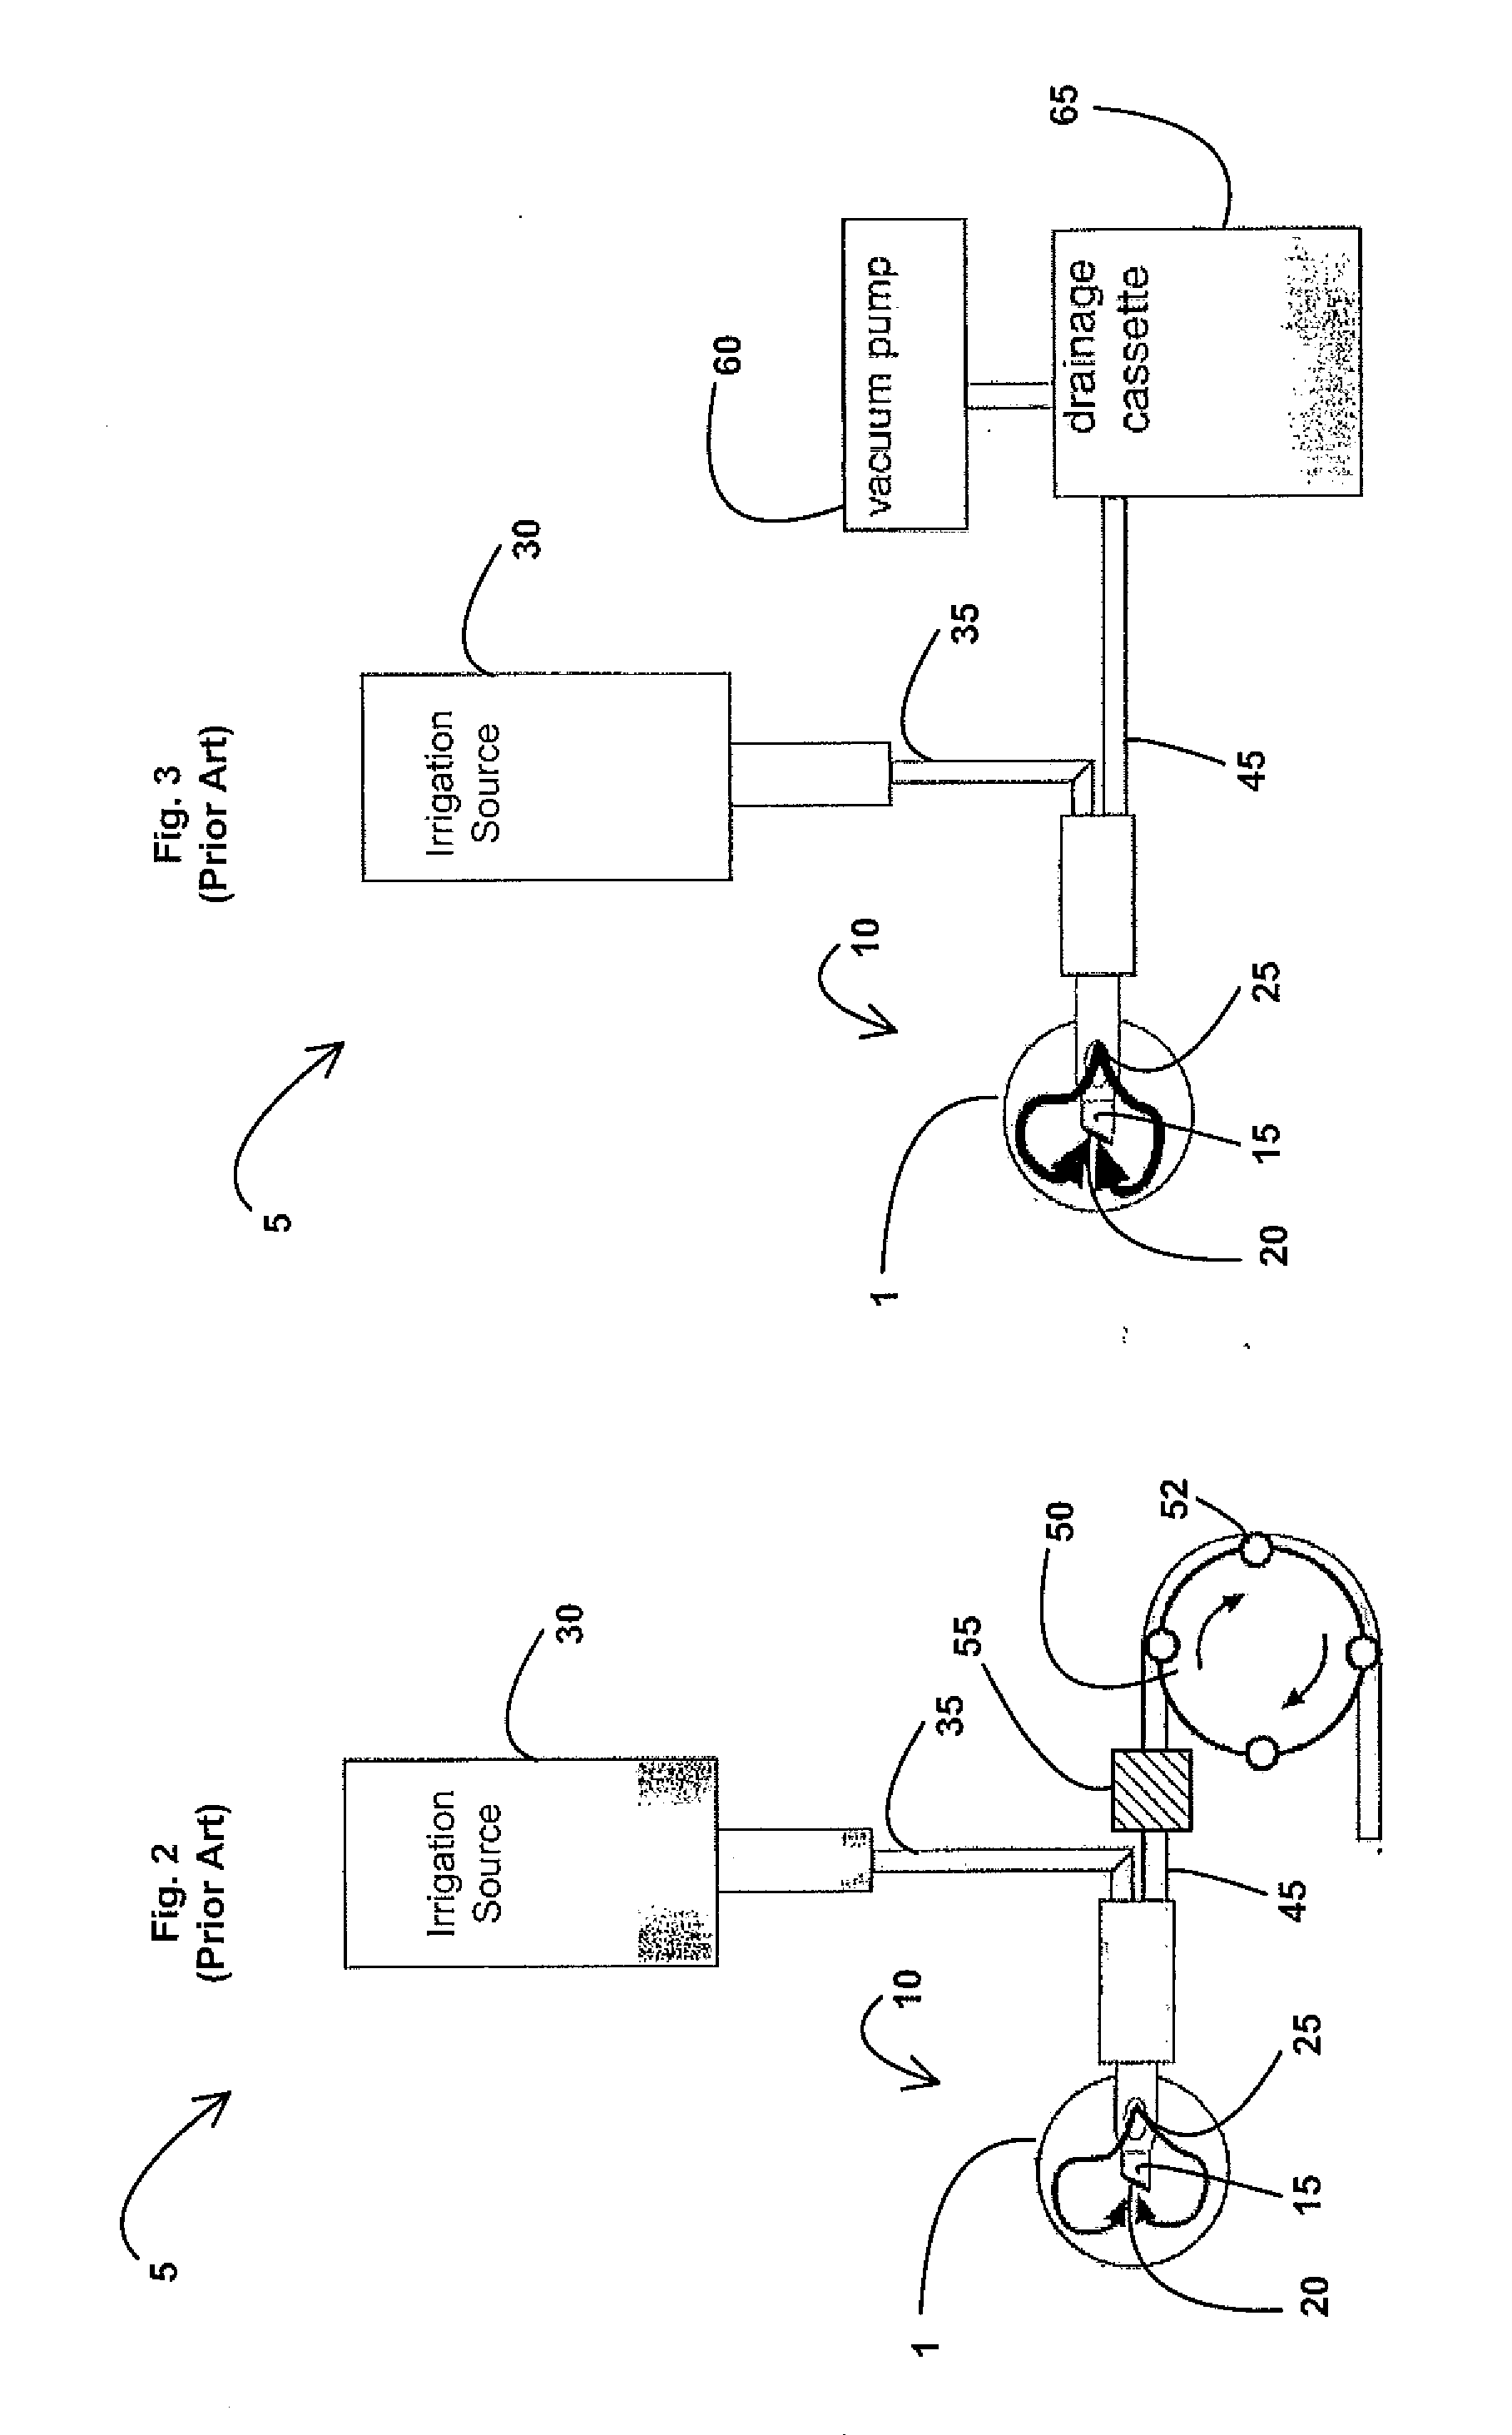 Systems and methods for power and flow rate control